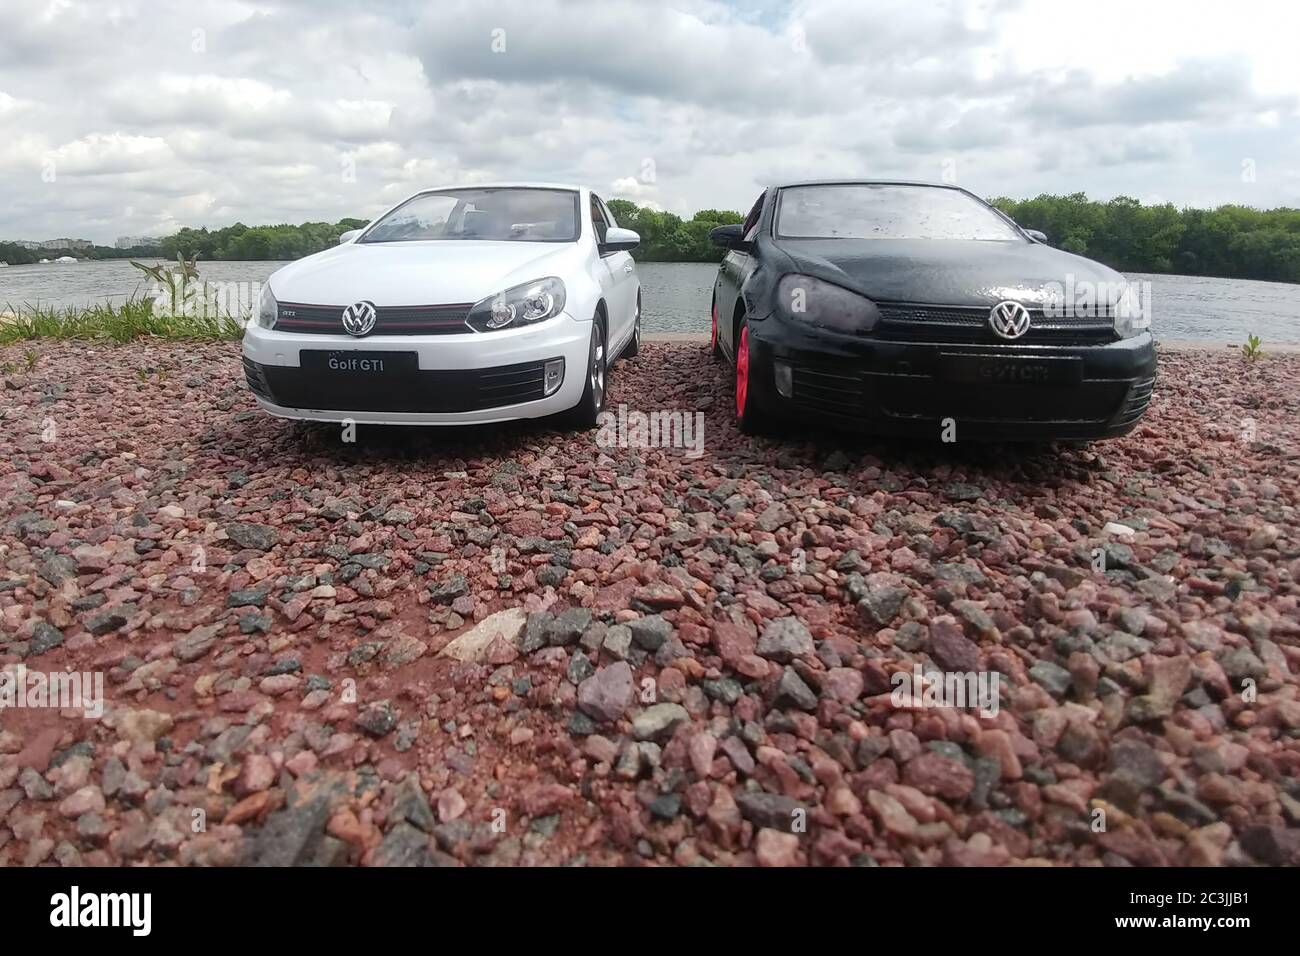 Moscow, Russia - May 03, 2019: Two toy cars in river park. 2 Volkswagen golf mk6 stand on a pebble beach. White and black GTI stand next to each other. Moscow river at background Stock Photo